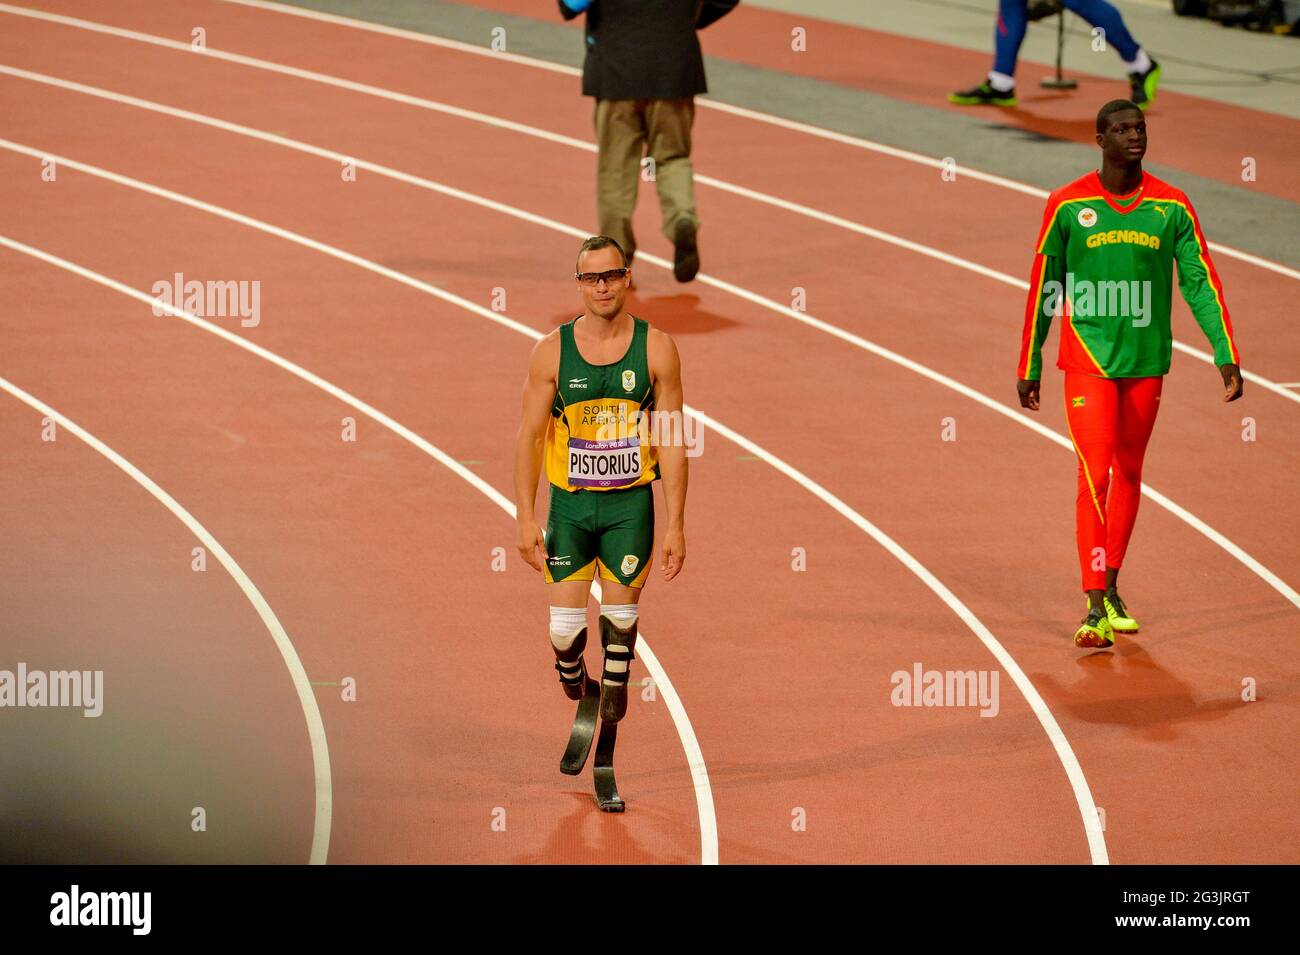 LONDON, ENGLAND - AUGUST 5, Oscar Pistorius of South African in the semi final of the mens 400m during the evening session of athletics at the Olympic Stadium  on August 5, 2012 in London, England Photo by Roger Sedres / Gallo Images Stock Photo